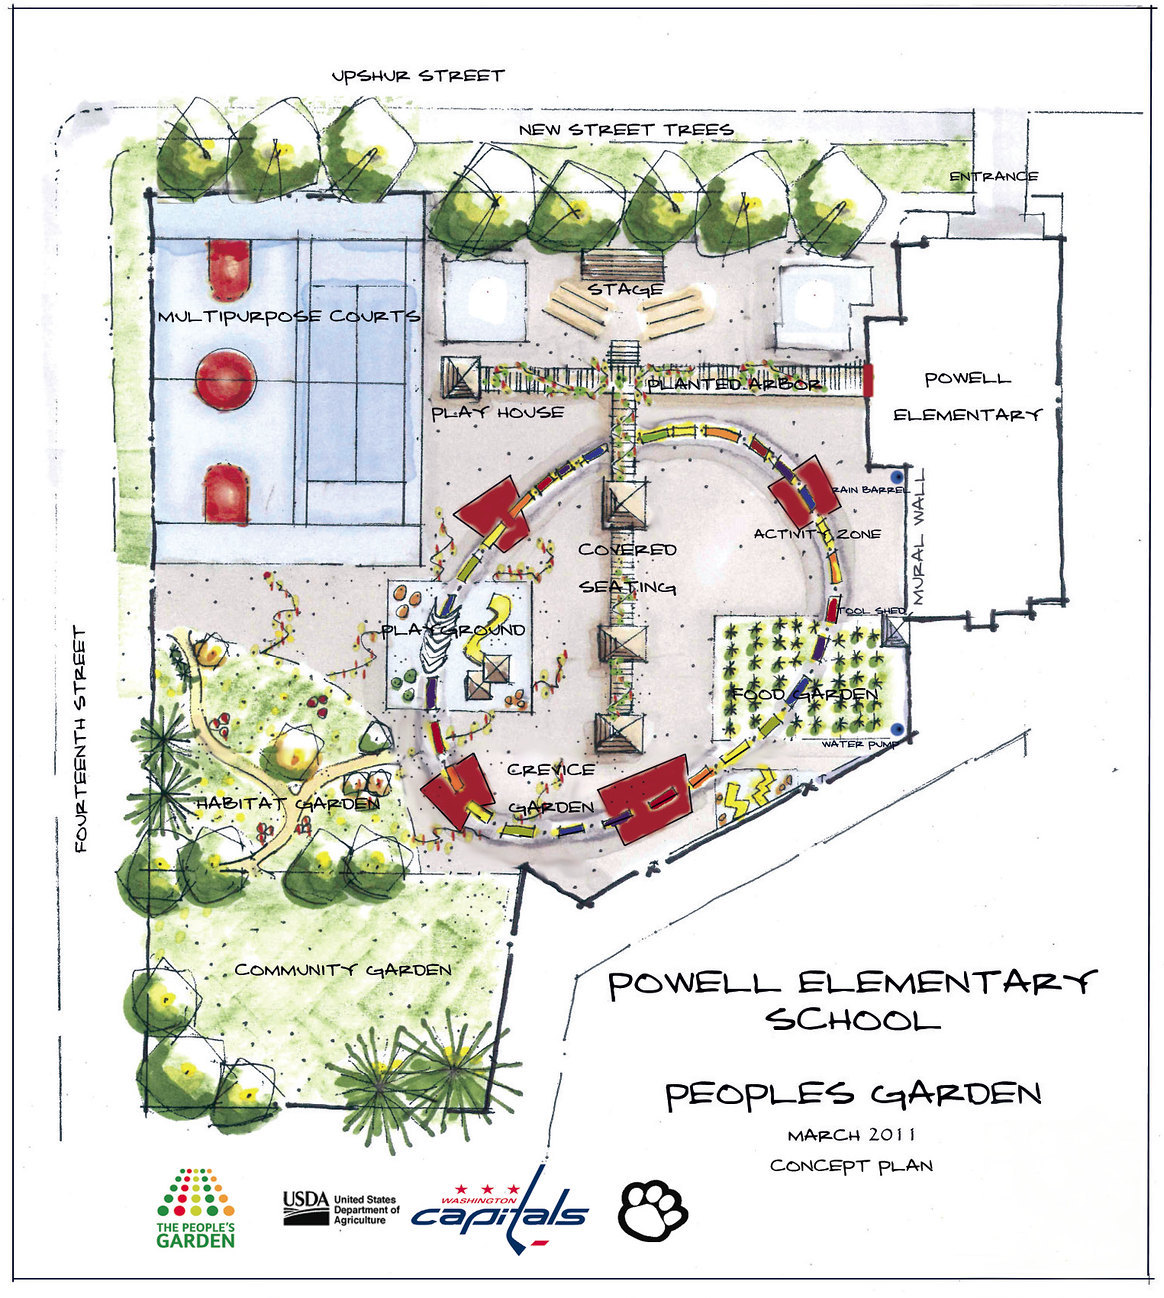 A watercolor painting plan of a garden. Labeled "powell elementary school peoples garden, march 2011, concept plan." Within this diagram is a community garden with plants on the lower left side, this goes into a habitat garden with specific plants, this leads into a playground, crevice garden, covered seating, activity zone, and good garden on the right side. The powell elementary building in on the far right side. The multiple purpose courts are in the upper left side; next to this on the right side is a play house, stage, and planted arbor. The top of the diagram is many large trees labeled new street trees.